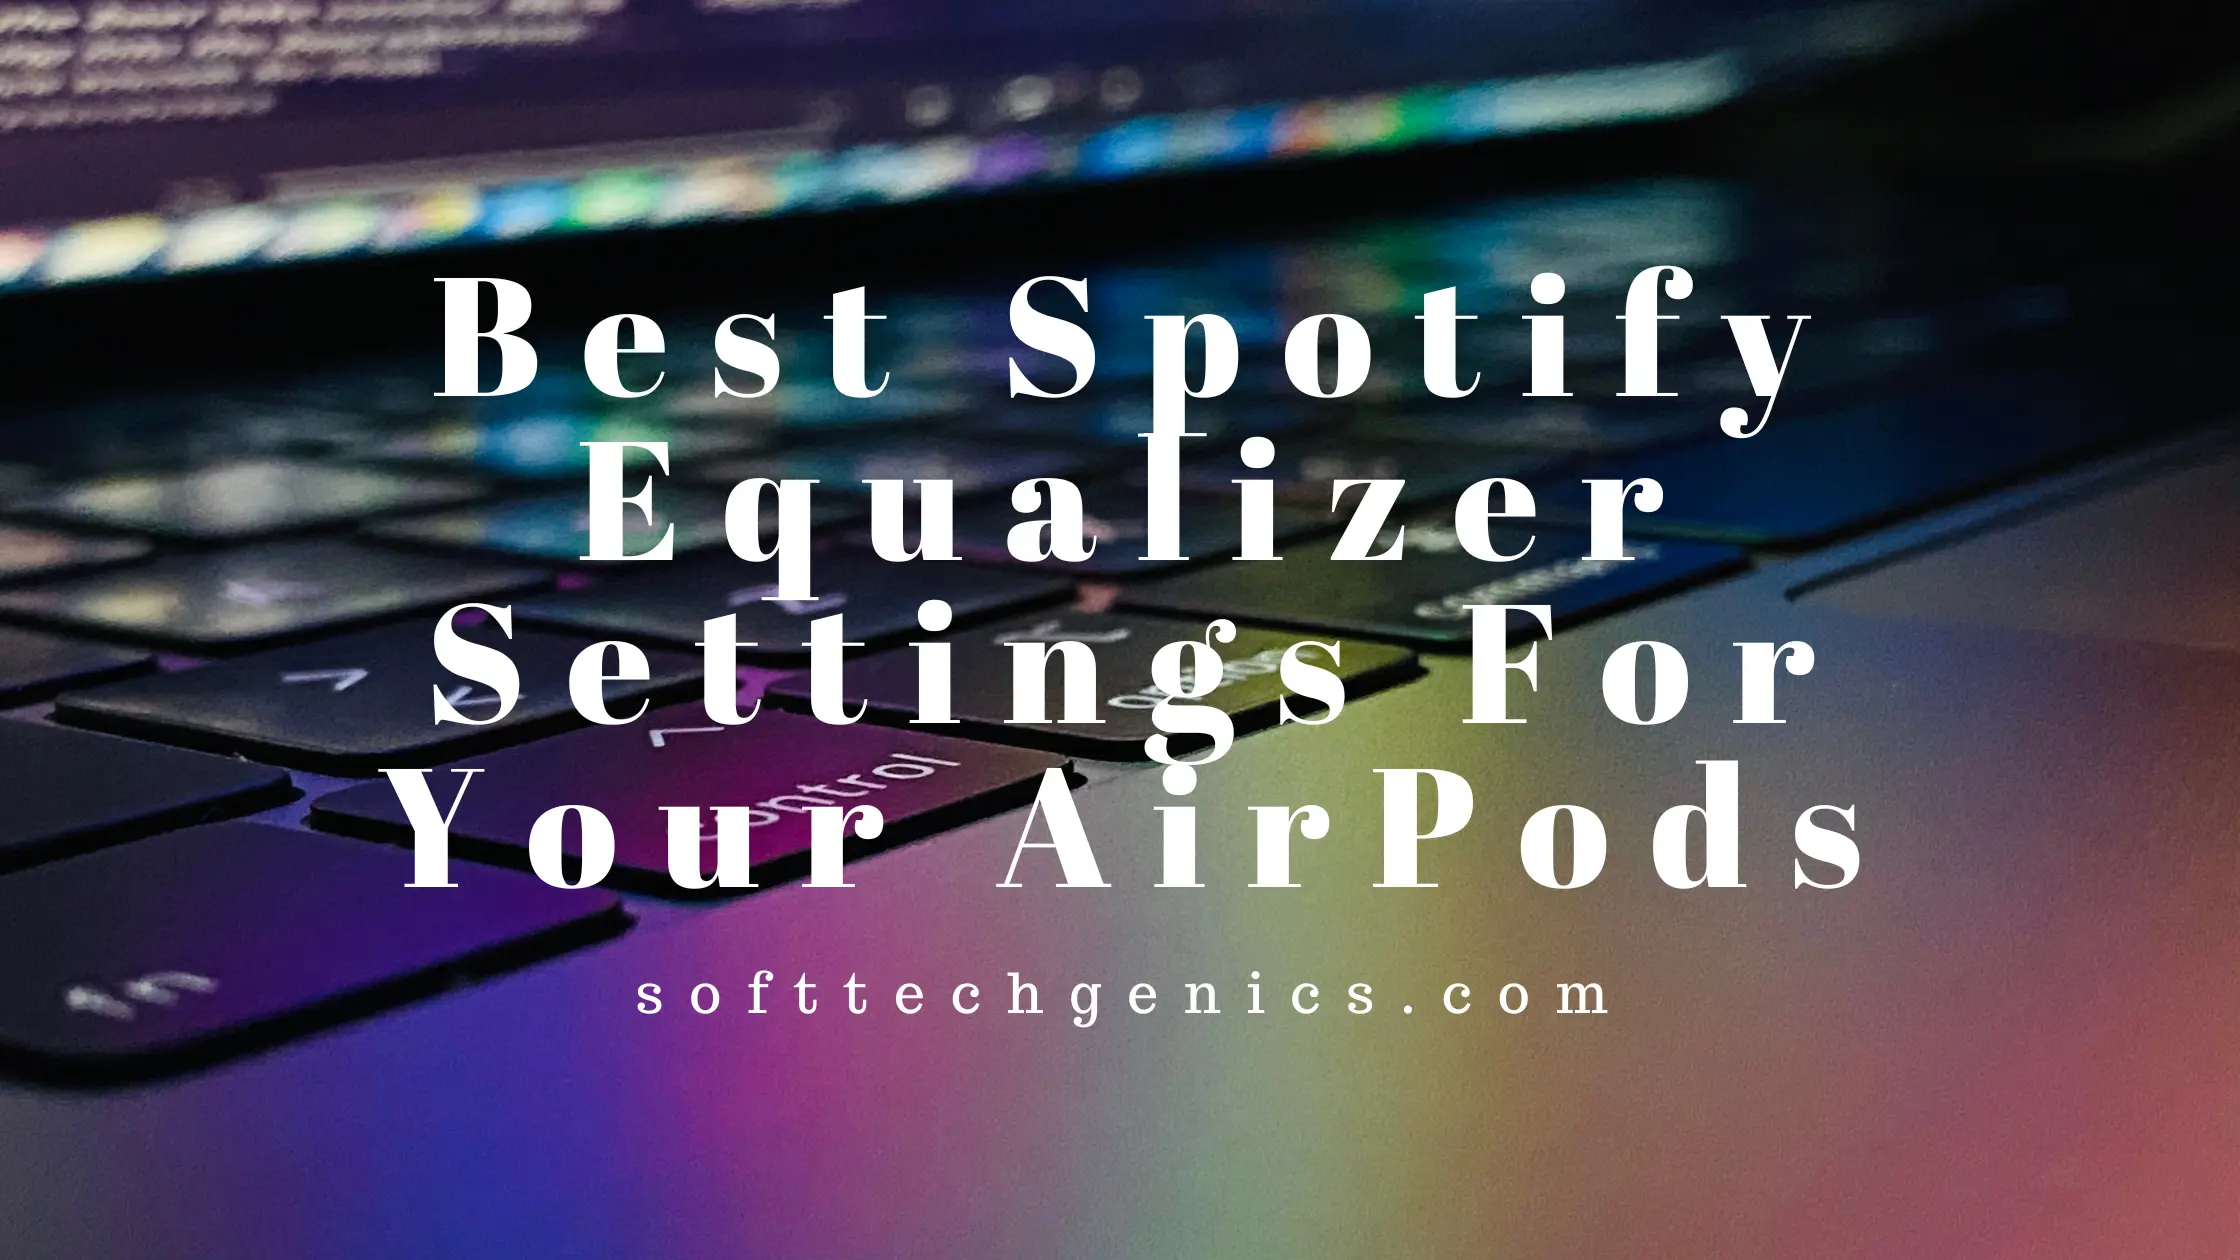 Best Spotify Equalizer Settings For Your AirPods